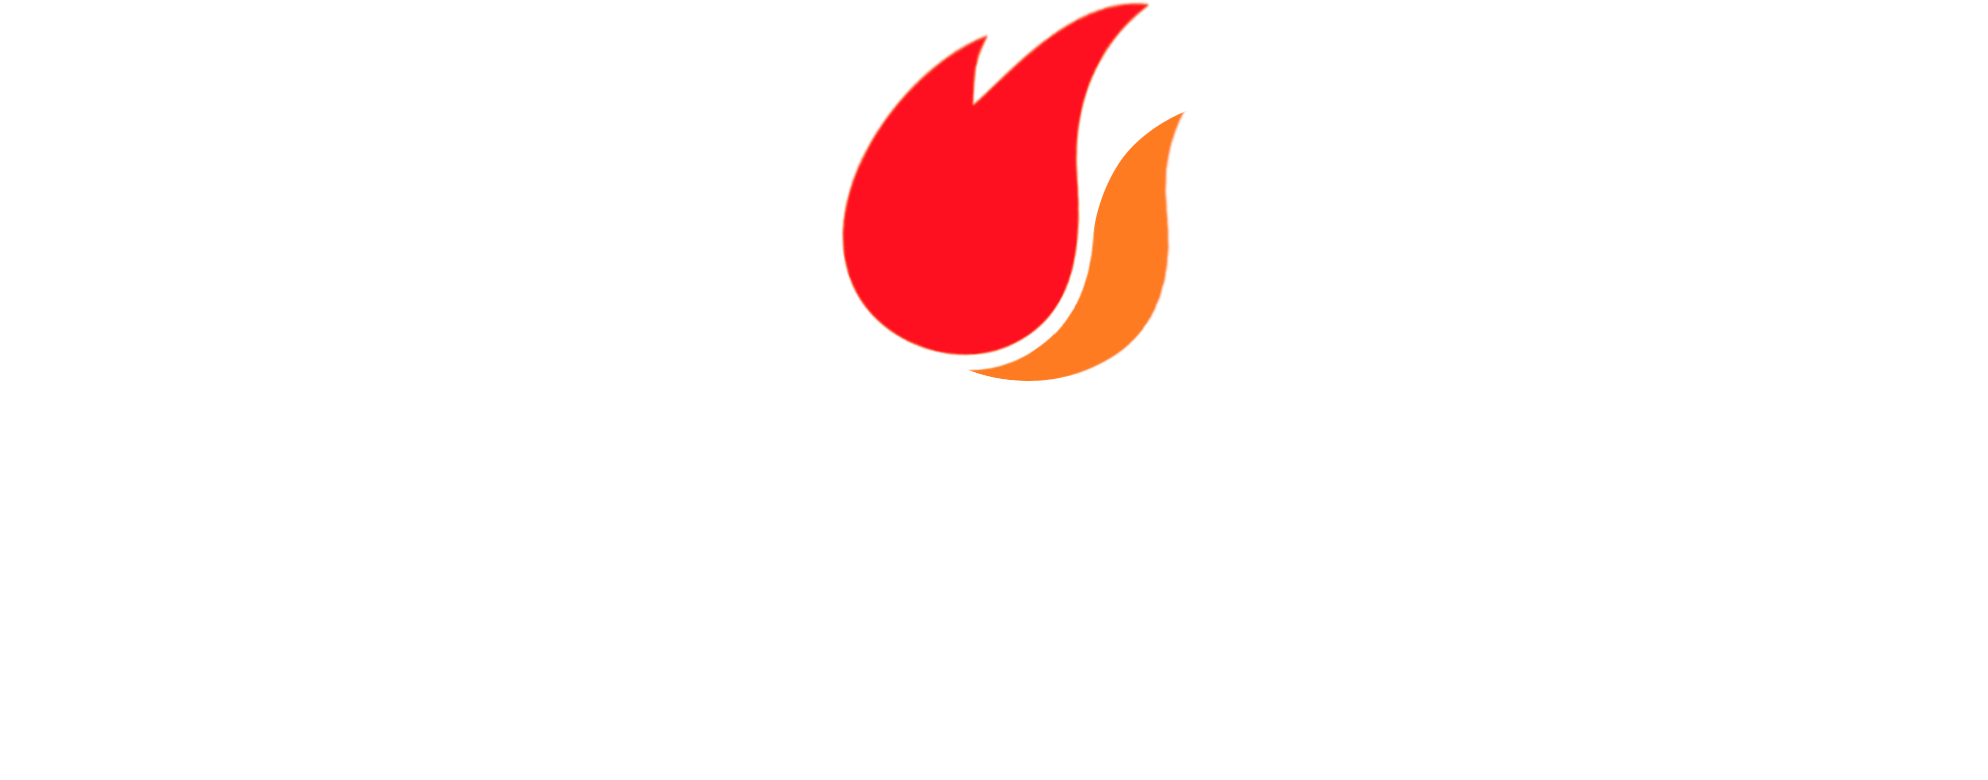 Home - Independent Propane Company